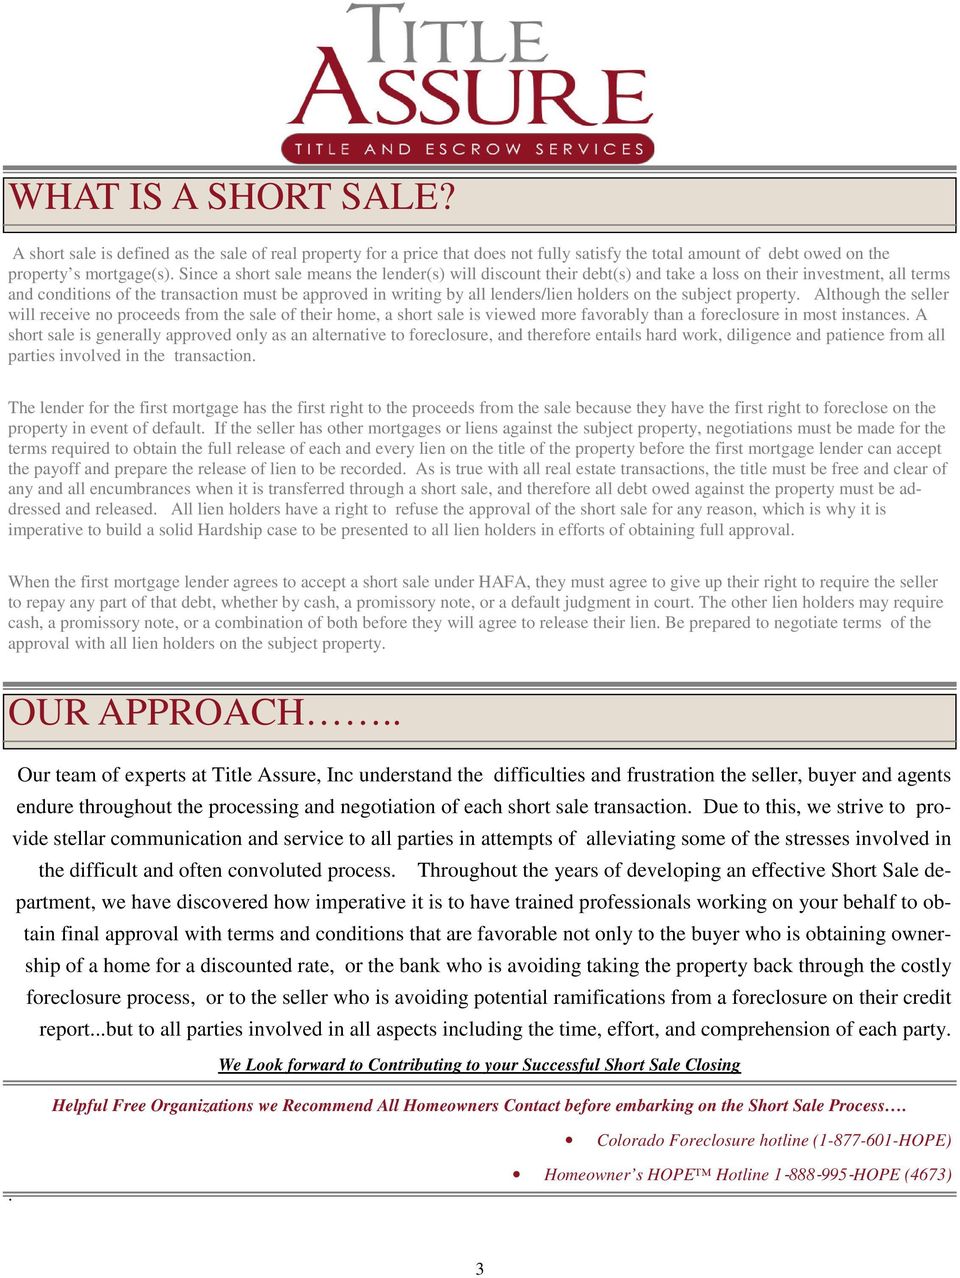 holders on the subject property. Although the seller will receive no proceeds from the sale of their home, a short sale is viewed more favorably than a foreclosure in most instances.